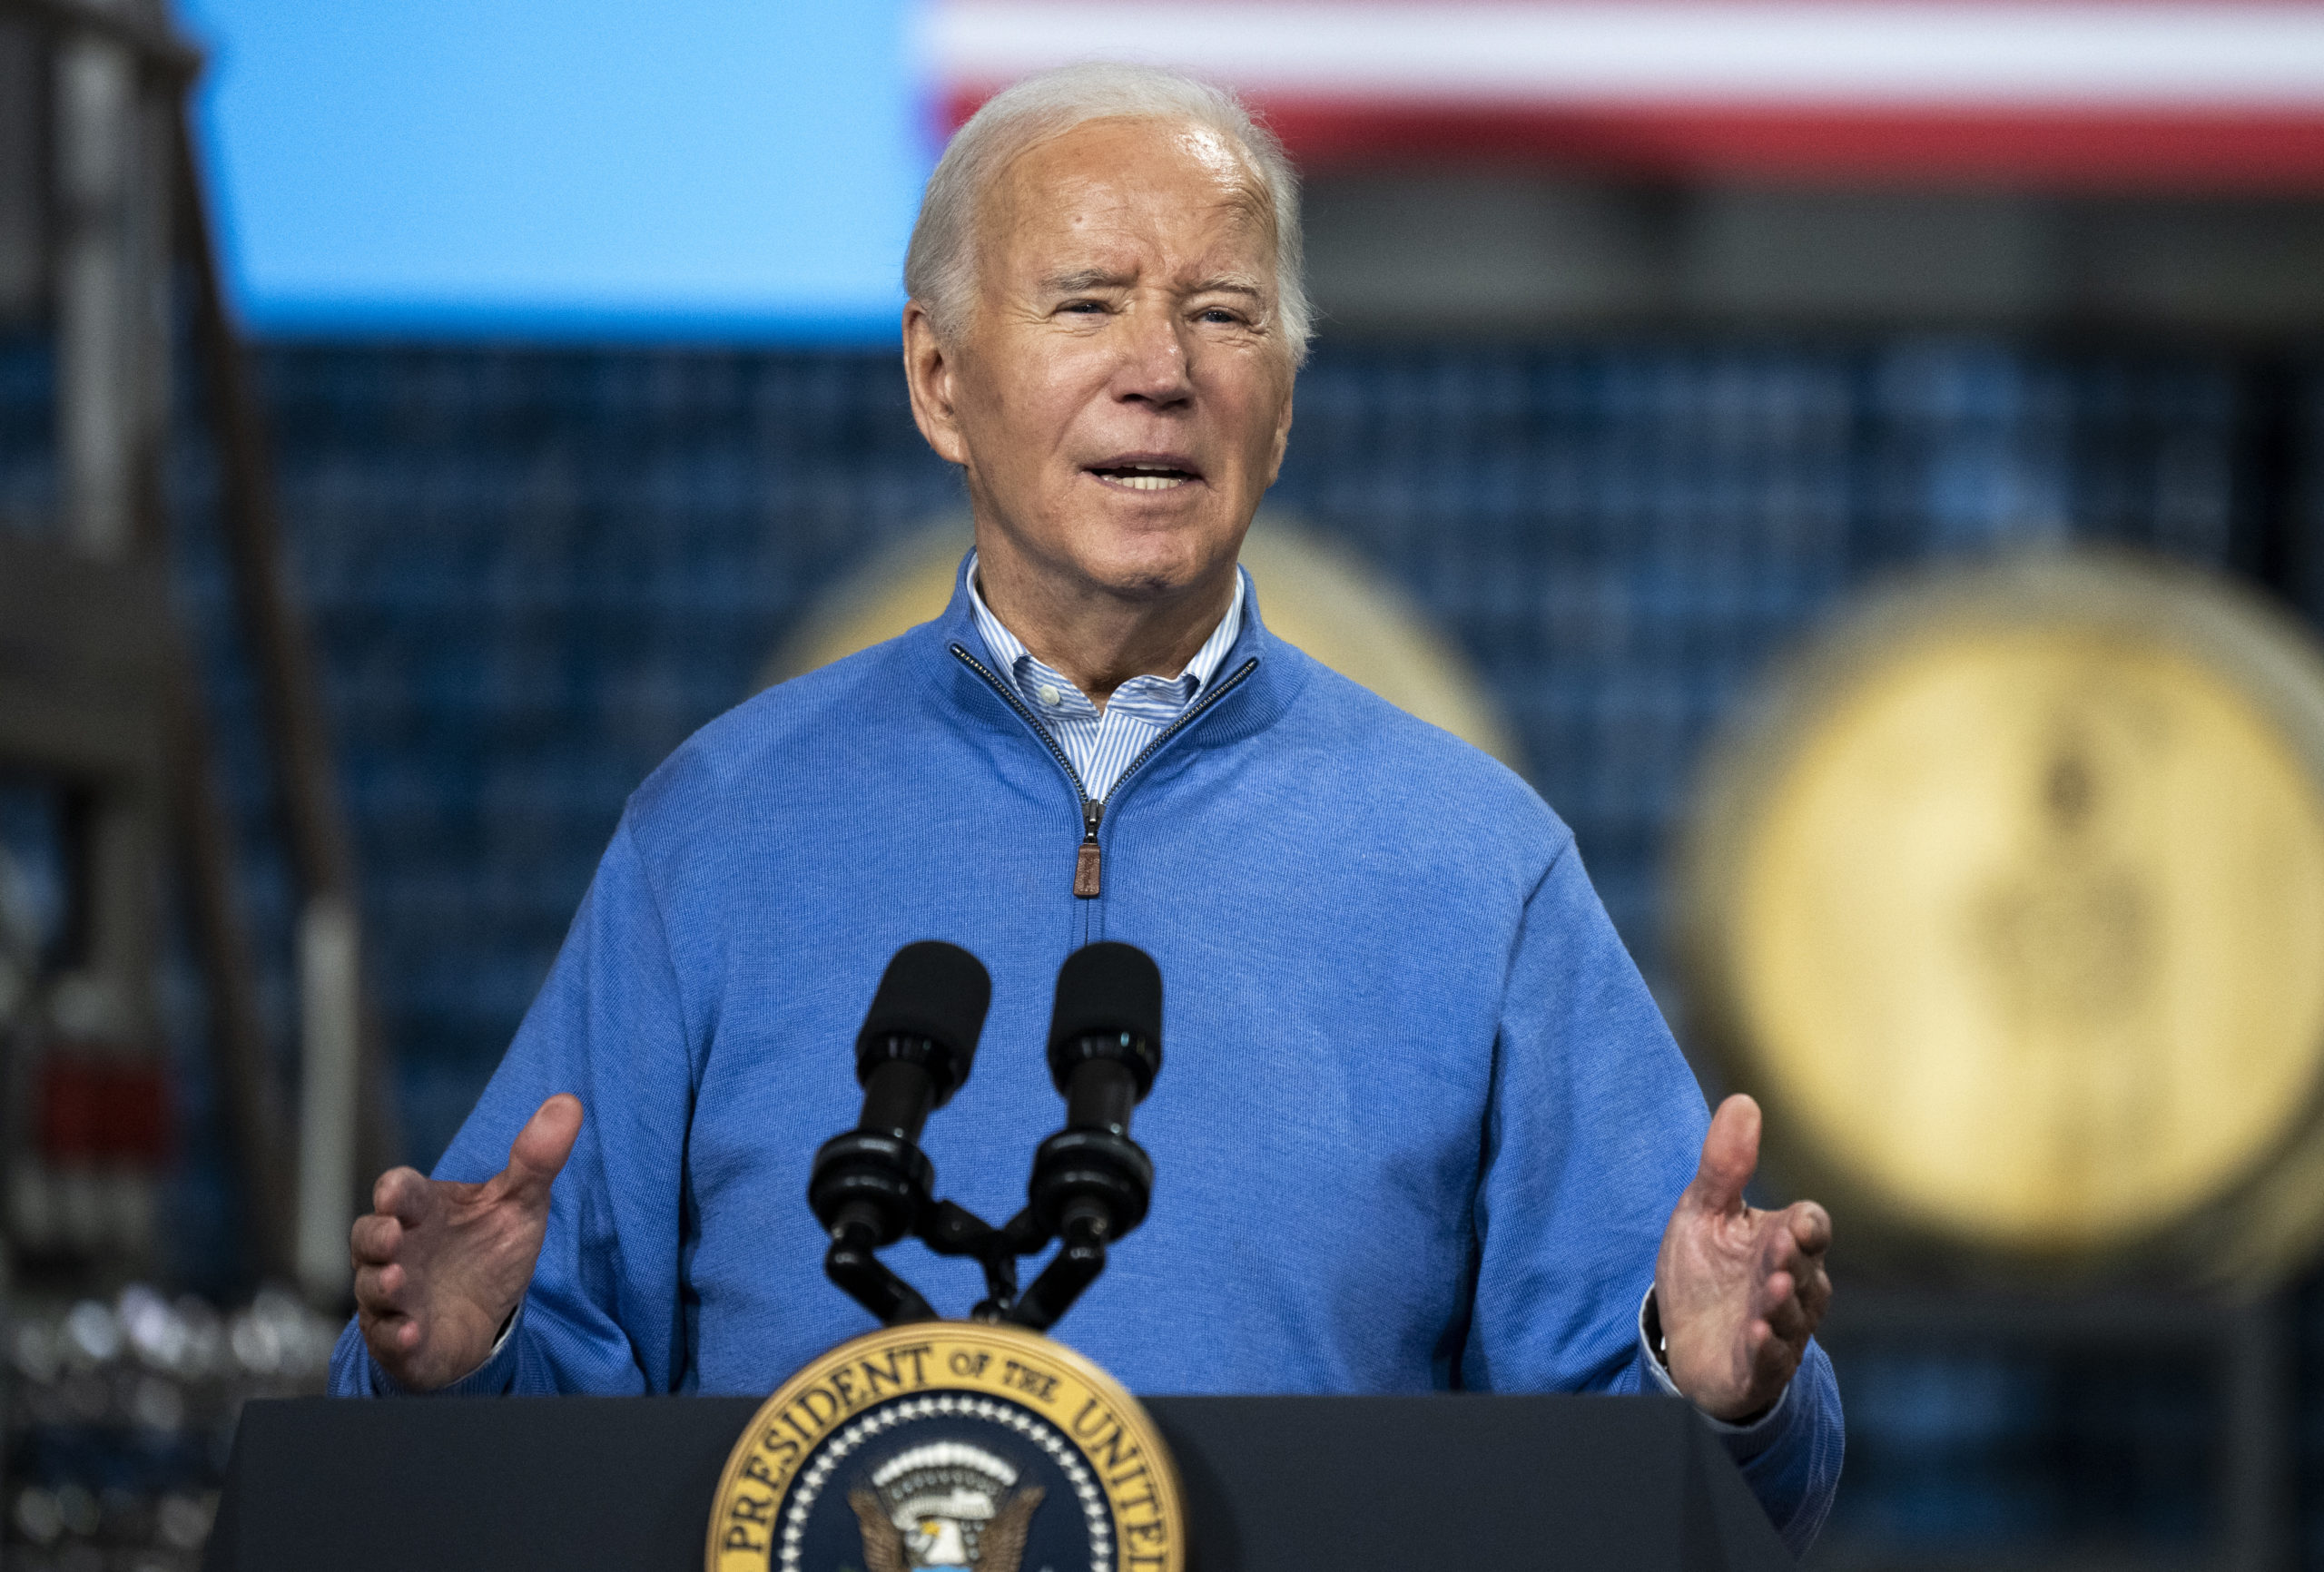 SUPERIOR, WISCONSIN - JANUARY 25: U.S. President Joe Biden speaks about funding for the I-535 Blatnik Bridge at Earth Rider Brewery on January 25, 2024 in Superior, Wisconsin. Biden touched on his economic agenda and recent federal funding for infrastructure projects. (Photo by Stephen Maturen/Getty Images)